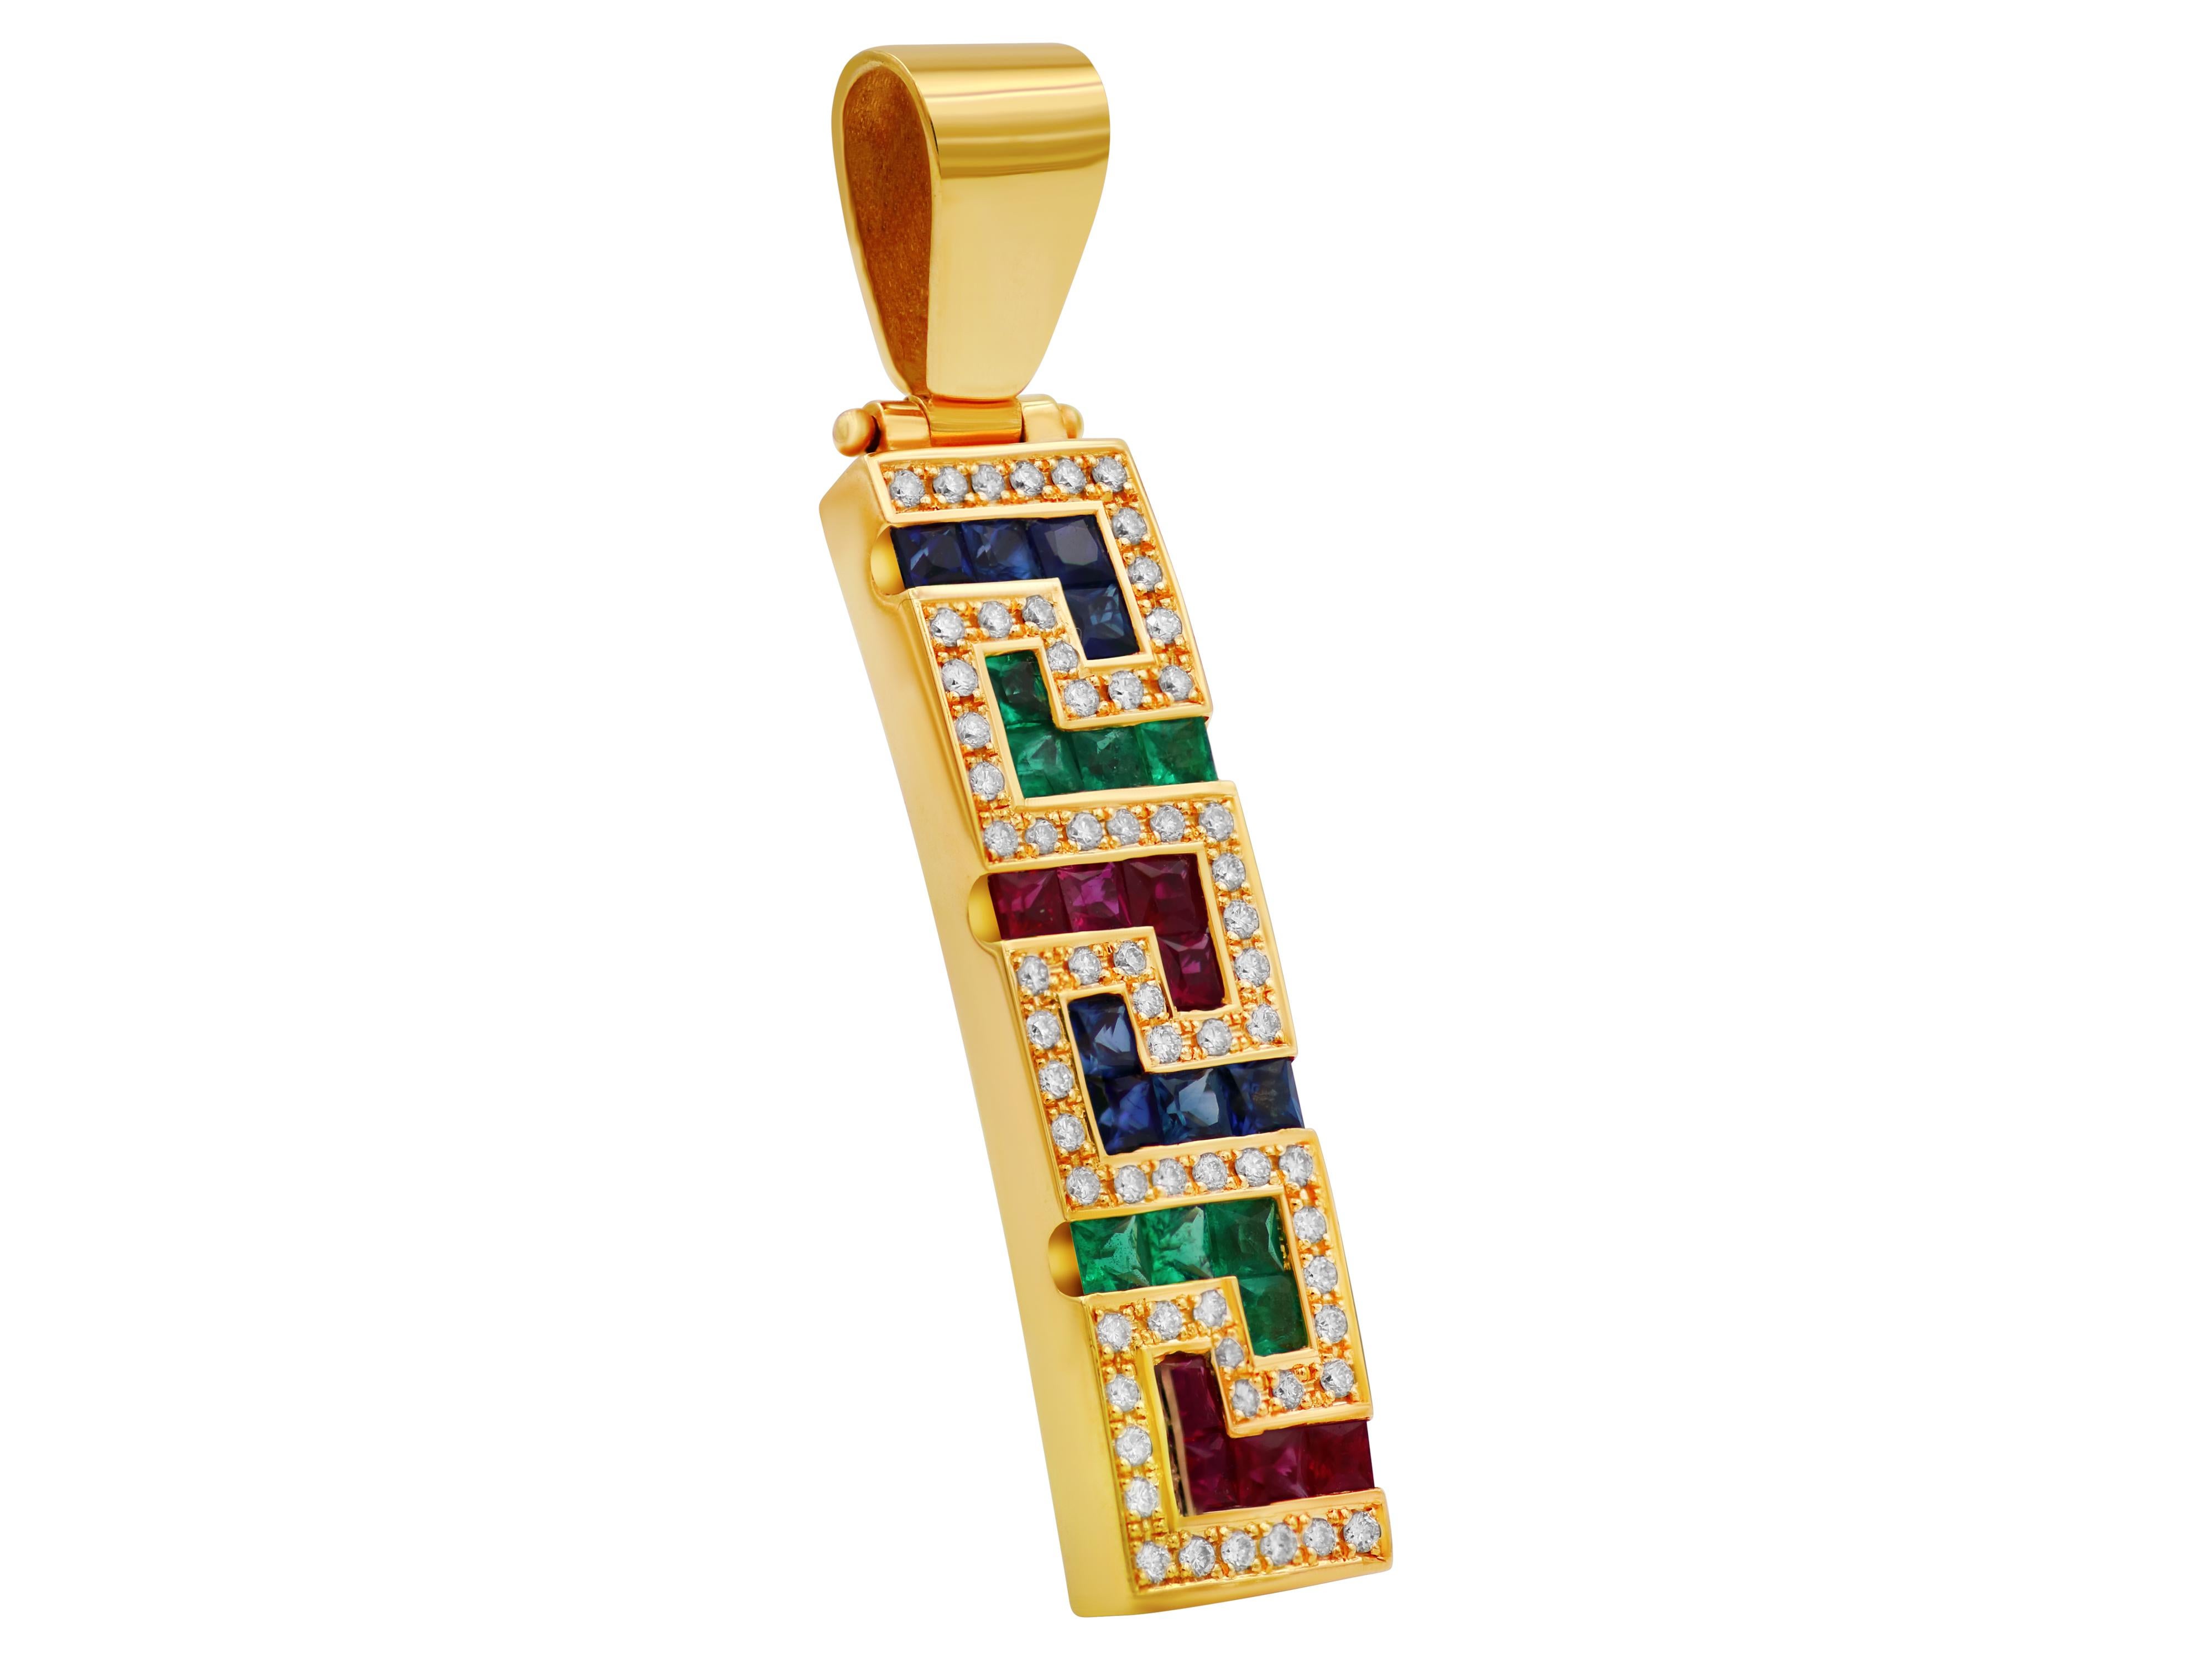 Greek key pendant in 18 karats yellow gold set set with colorful gems, 2.40 carats of Rubies, Emeralds and Sapphires and 0.50 carats brilliant cut diamonds. The frame around it is the pave setting of natural Diamonds that adds light and luxury to